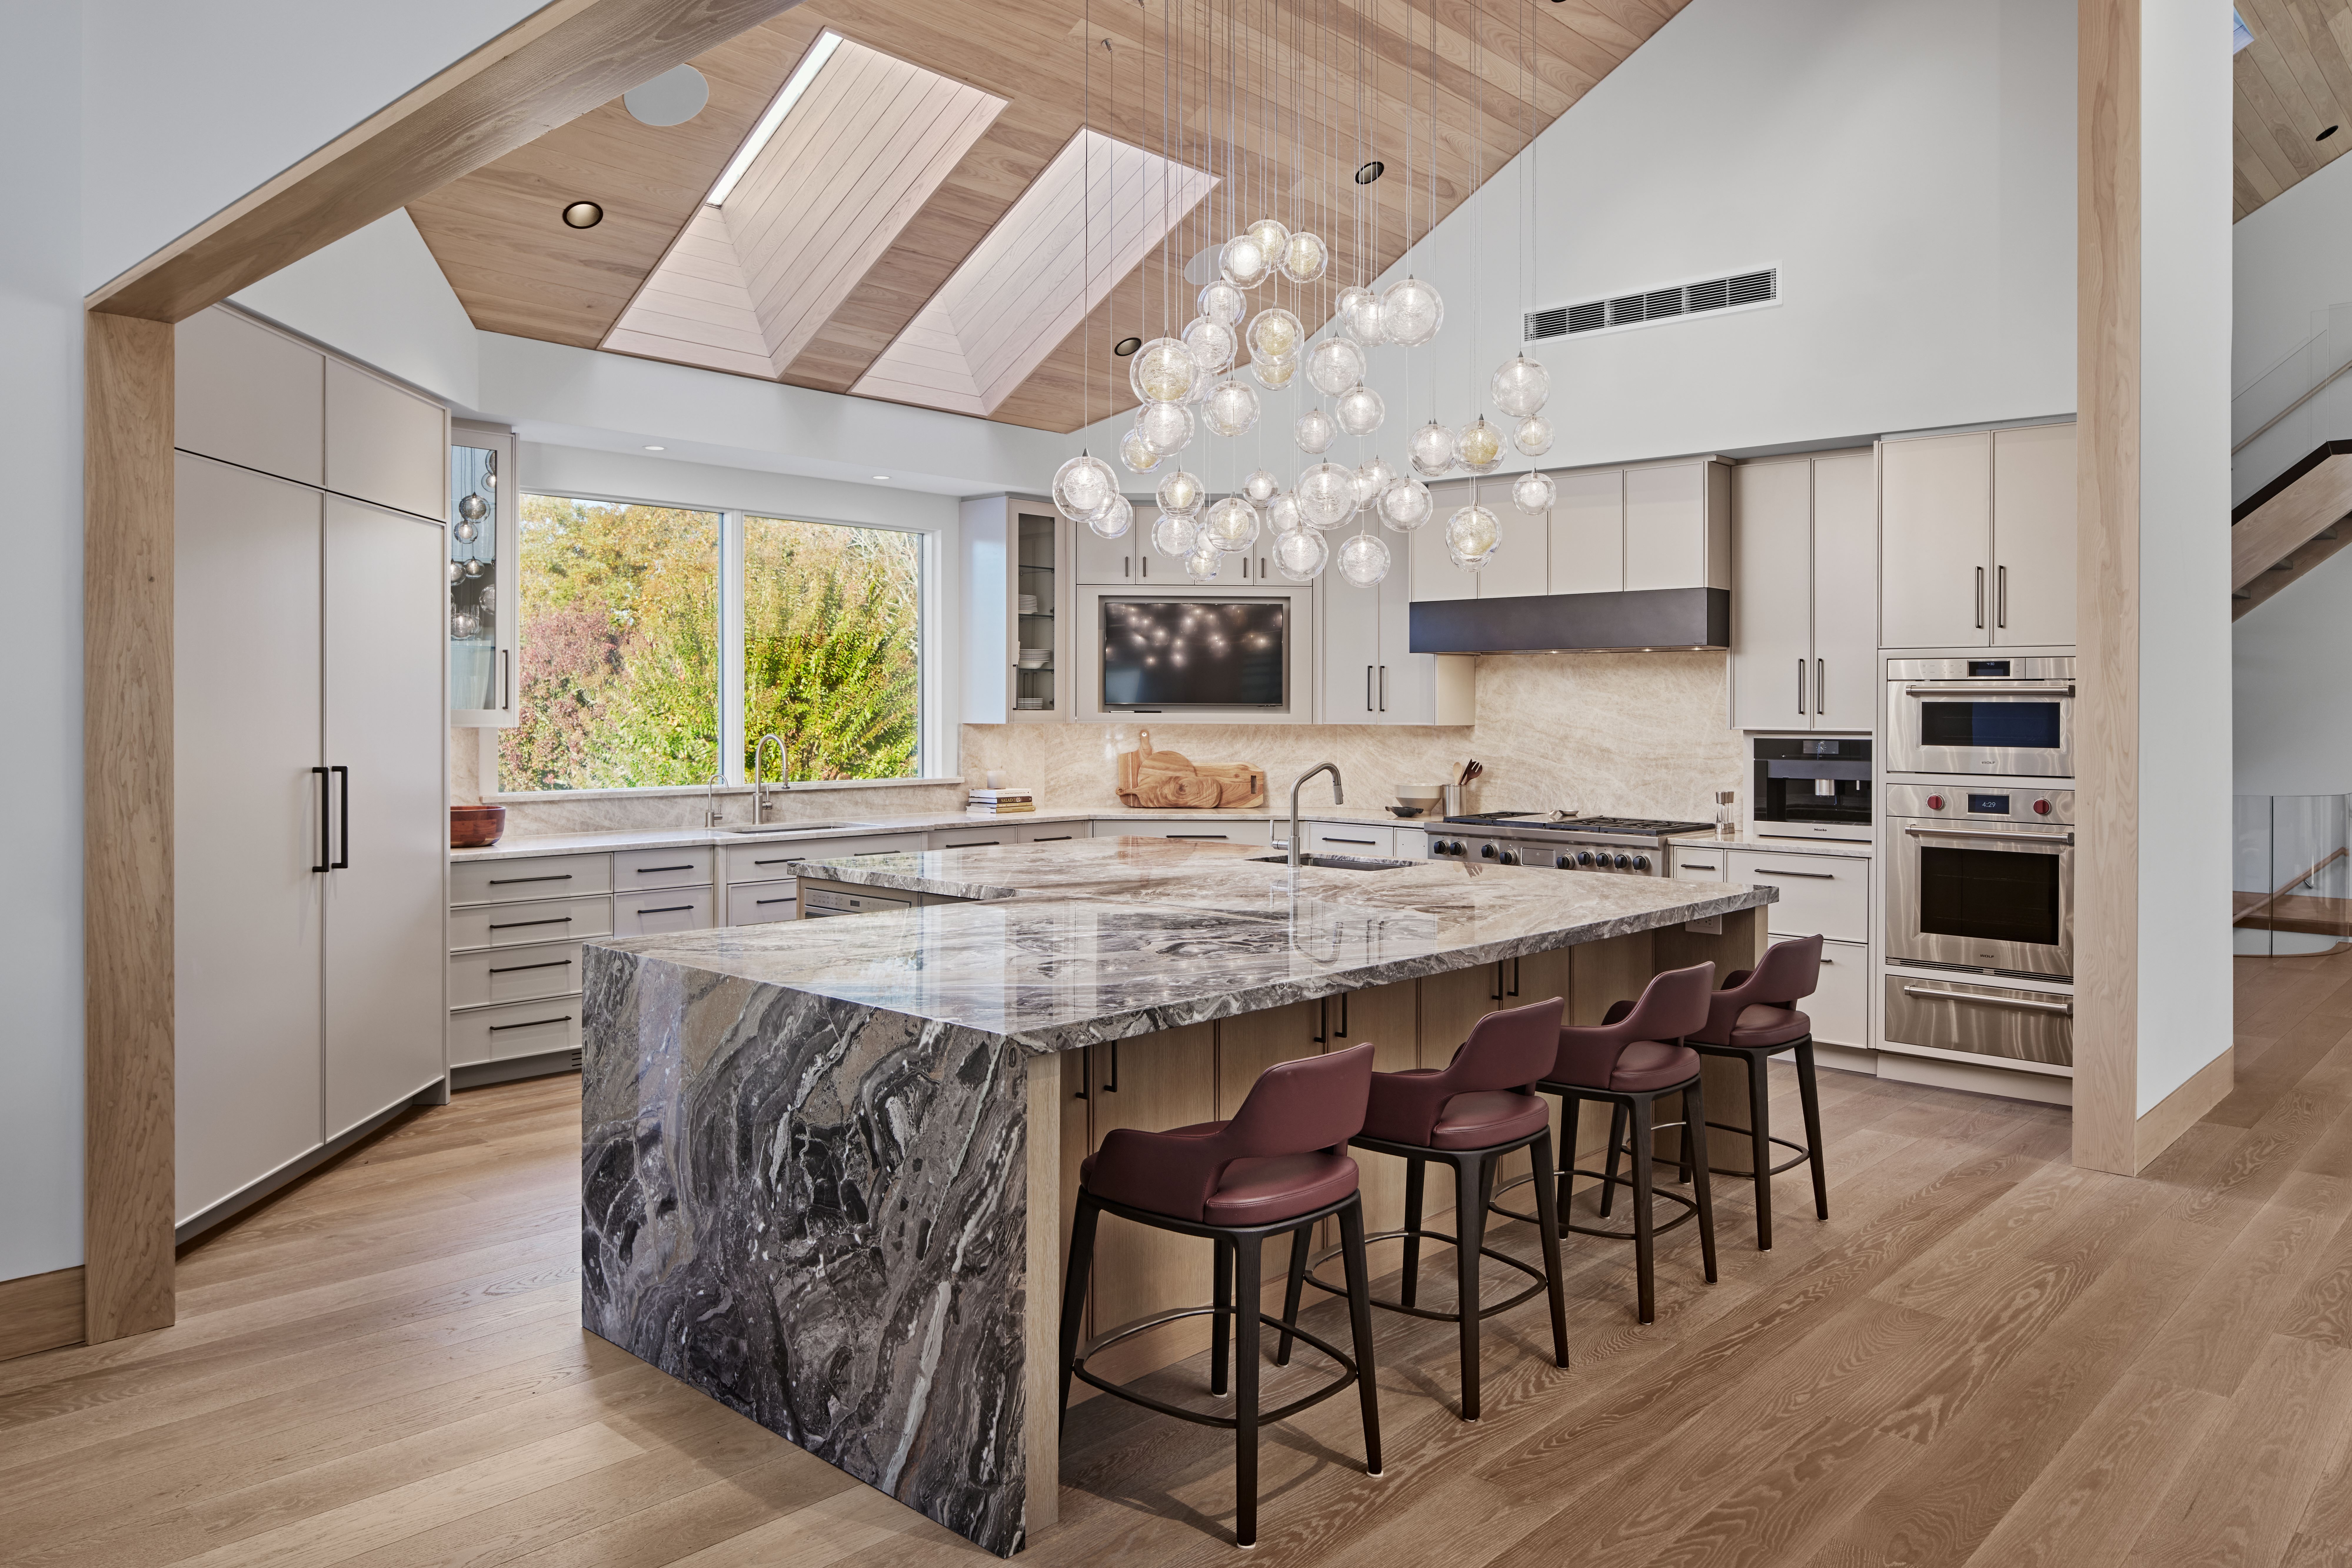 Quogue Residence